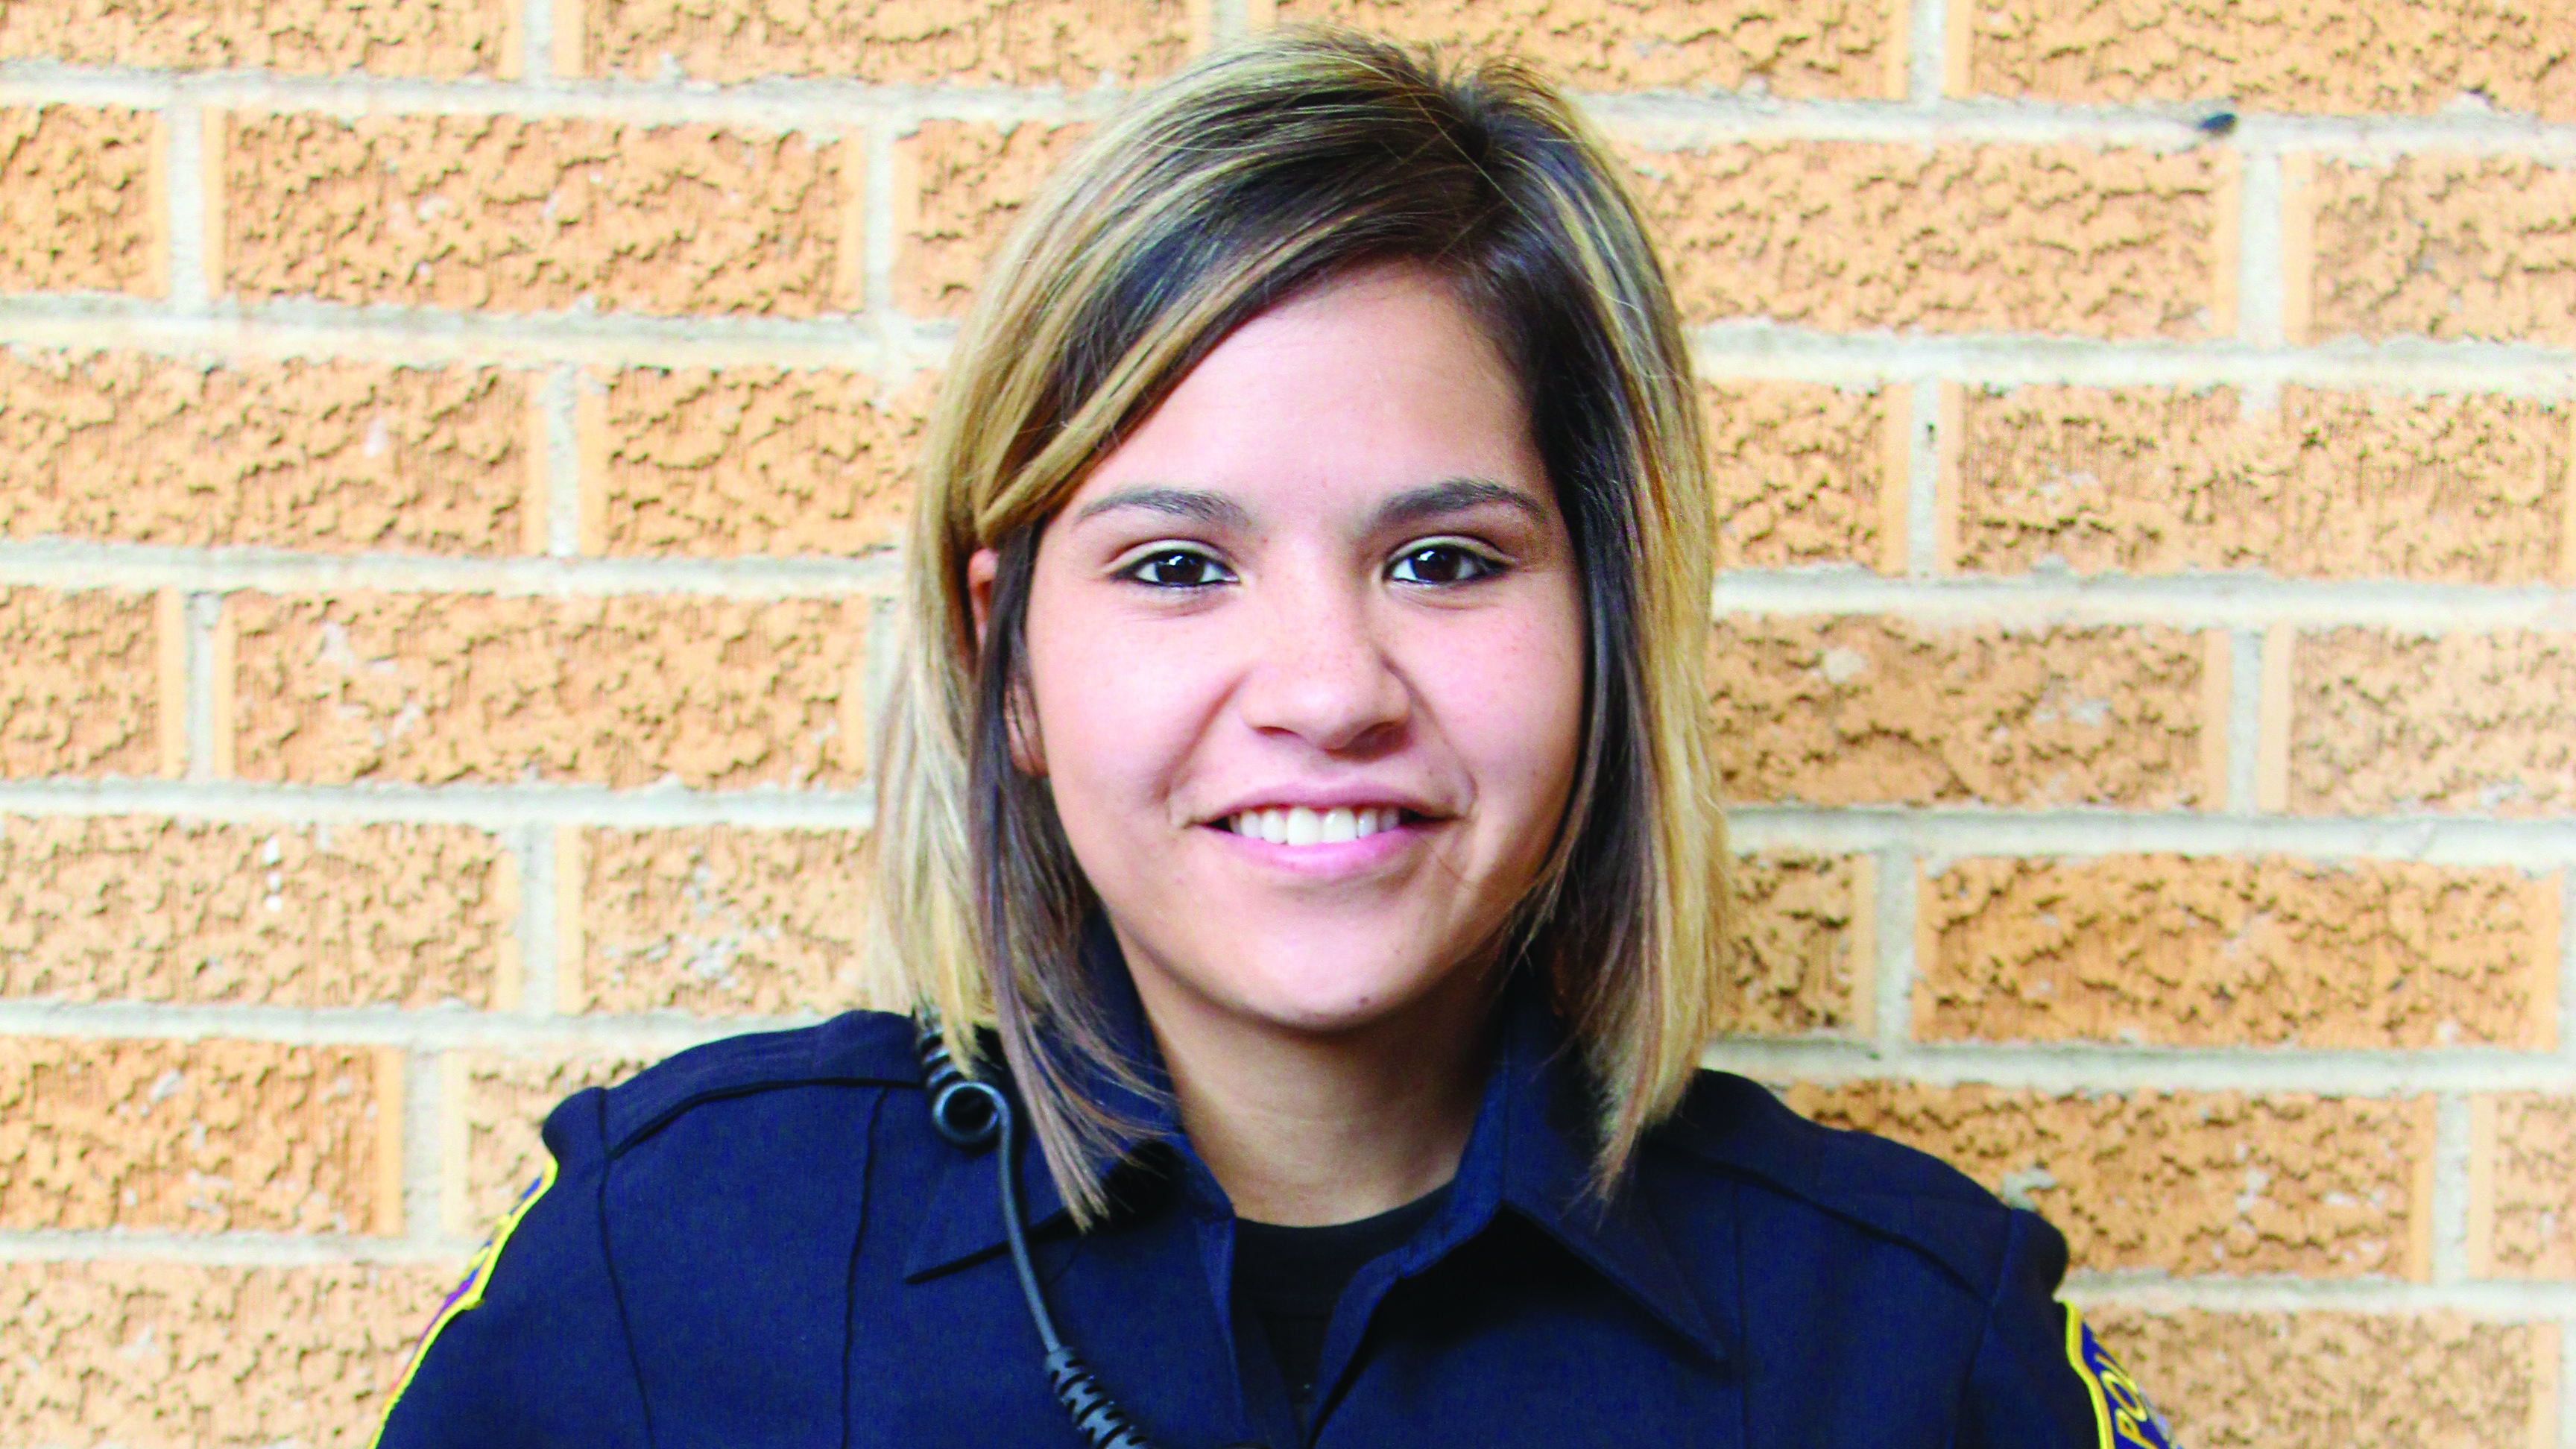 Recent graduate returns to college as campus officer